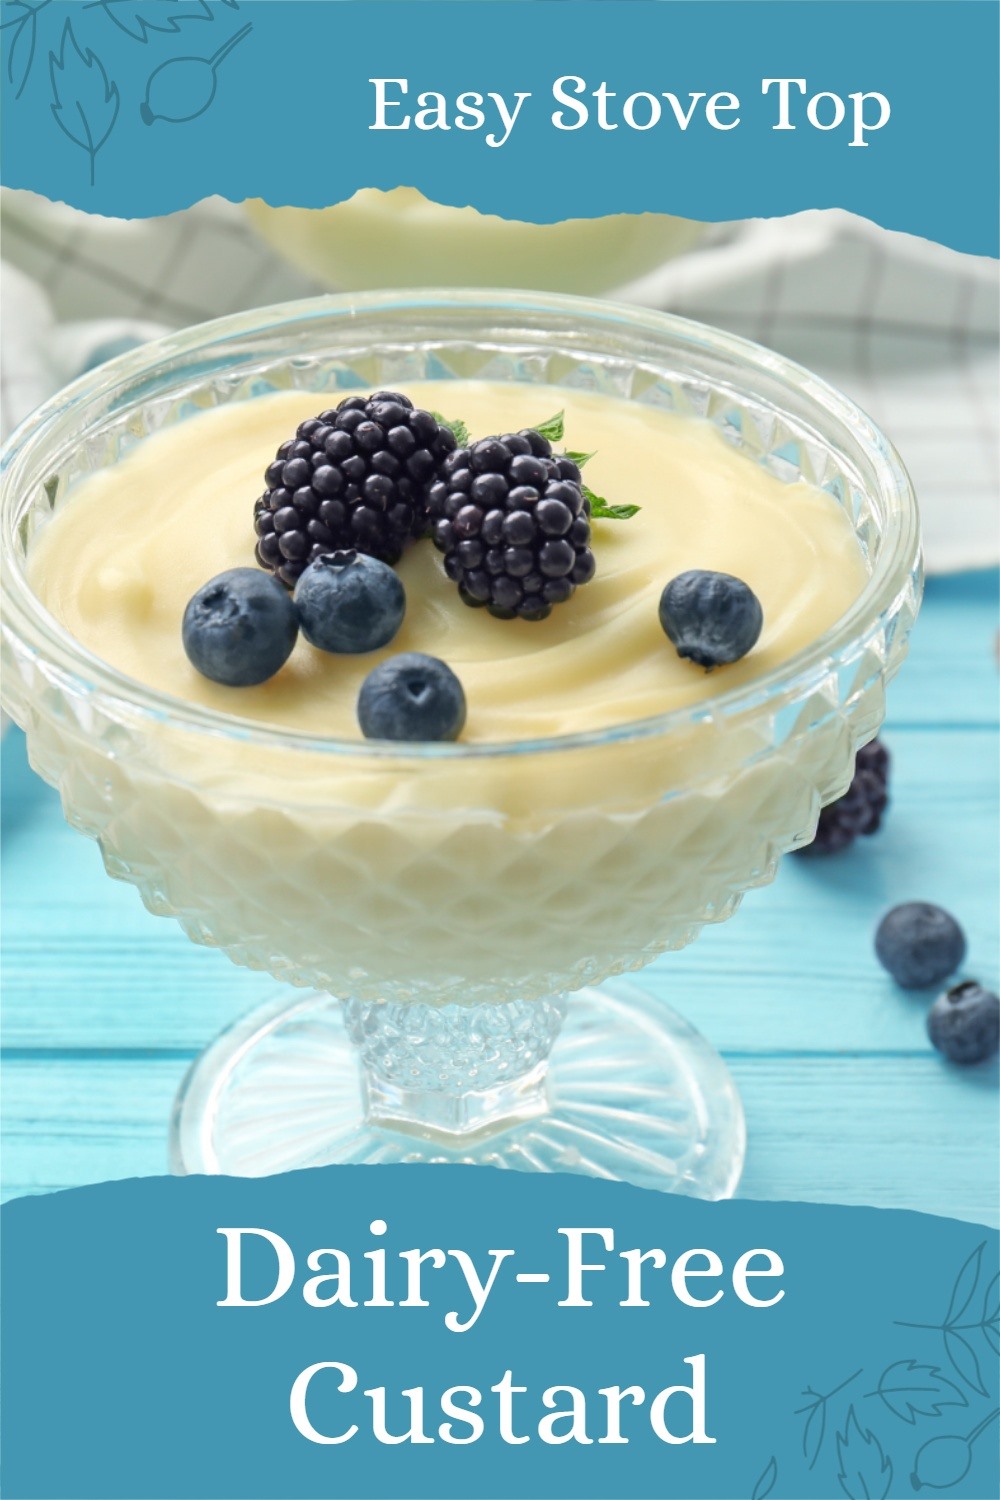 Easy Dairy-Free Custard Recipe made on the Stovetop in Minutes! No tempering, no complicated steps. Naturally gluten-free and nut-free, with soy-free option.